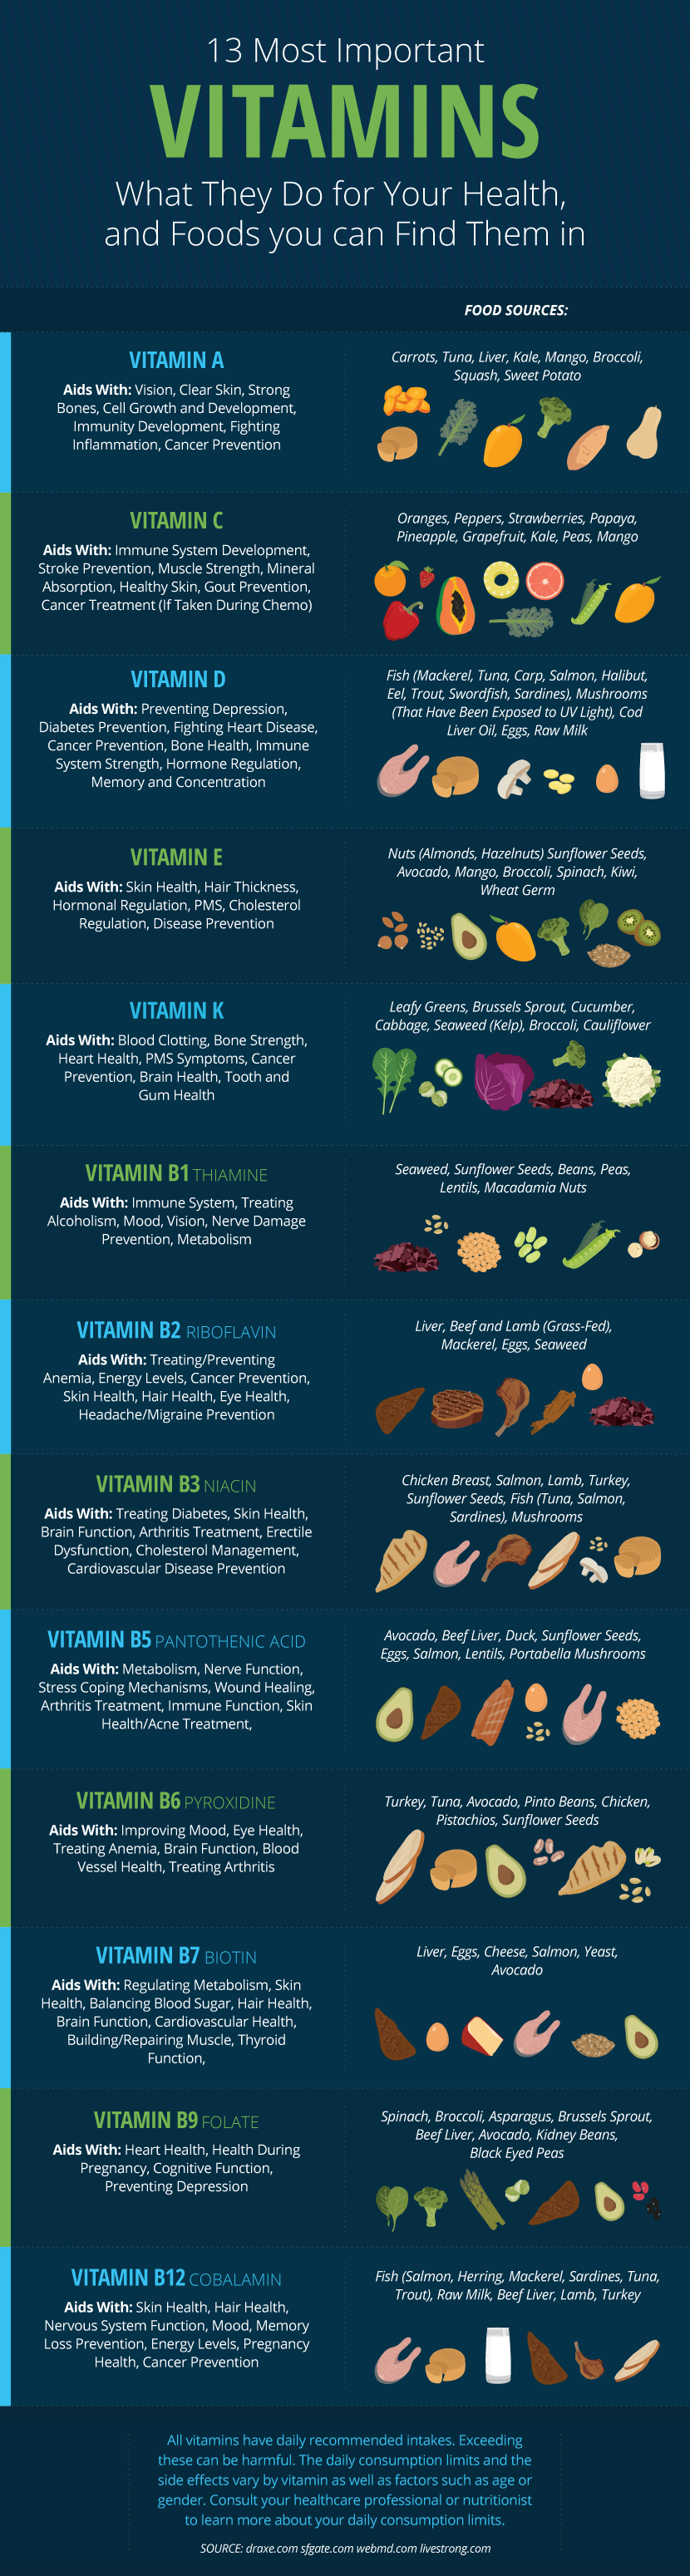 13 Most Important Vitamins - Guide to Vitamins and Minerals